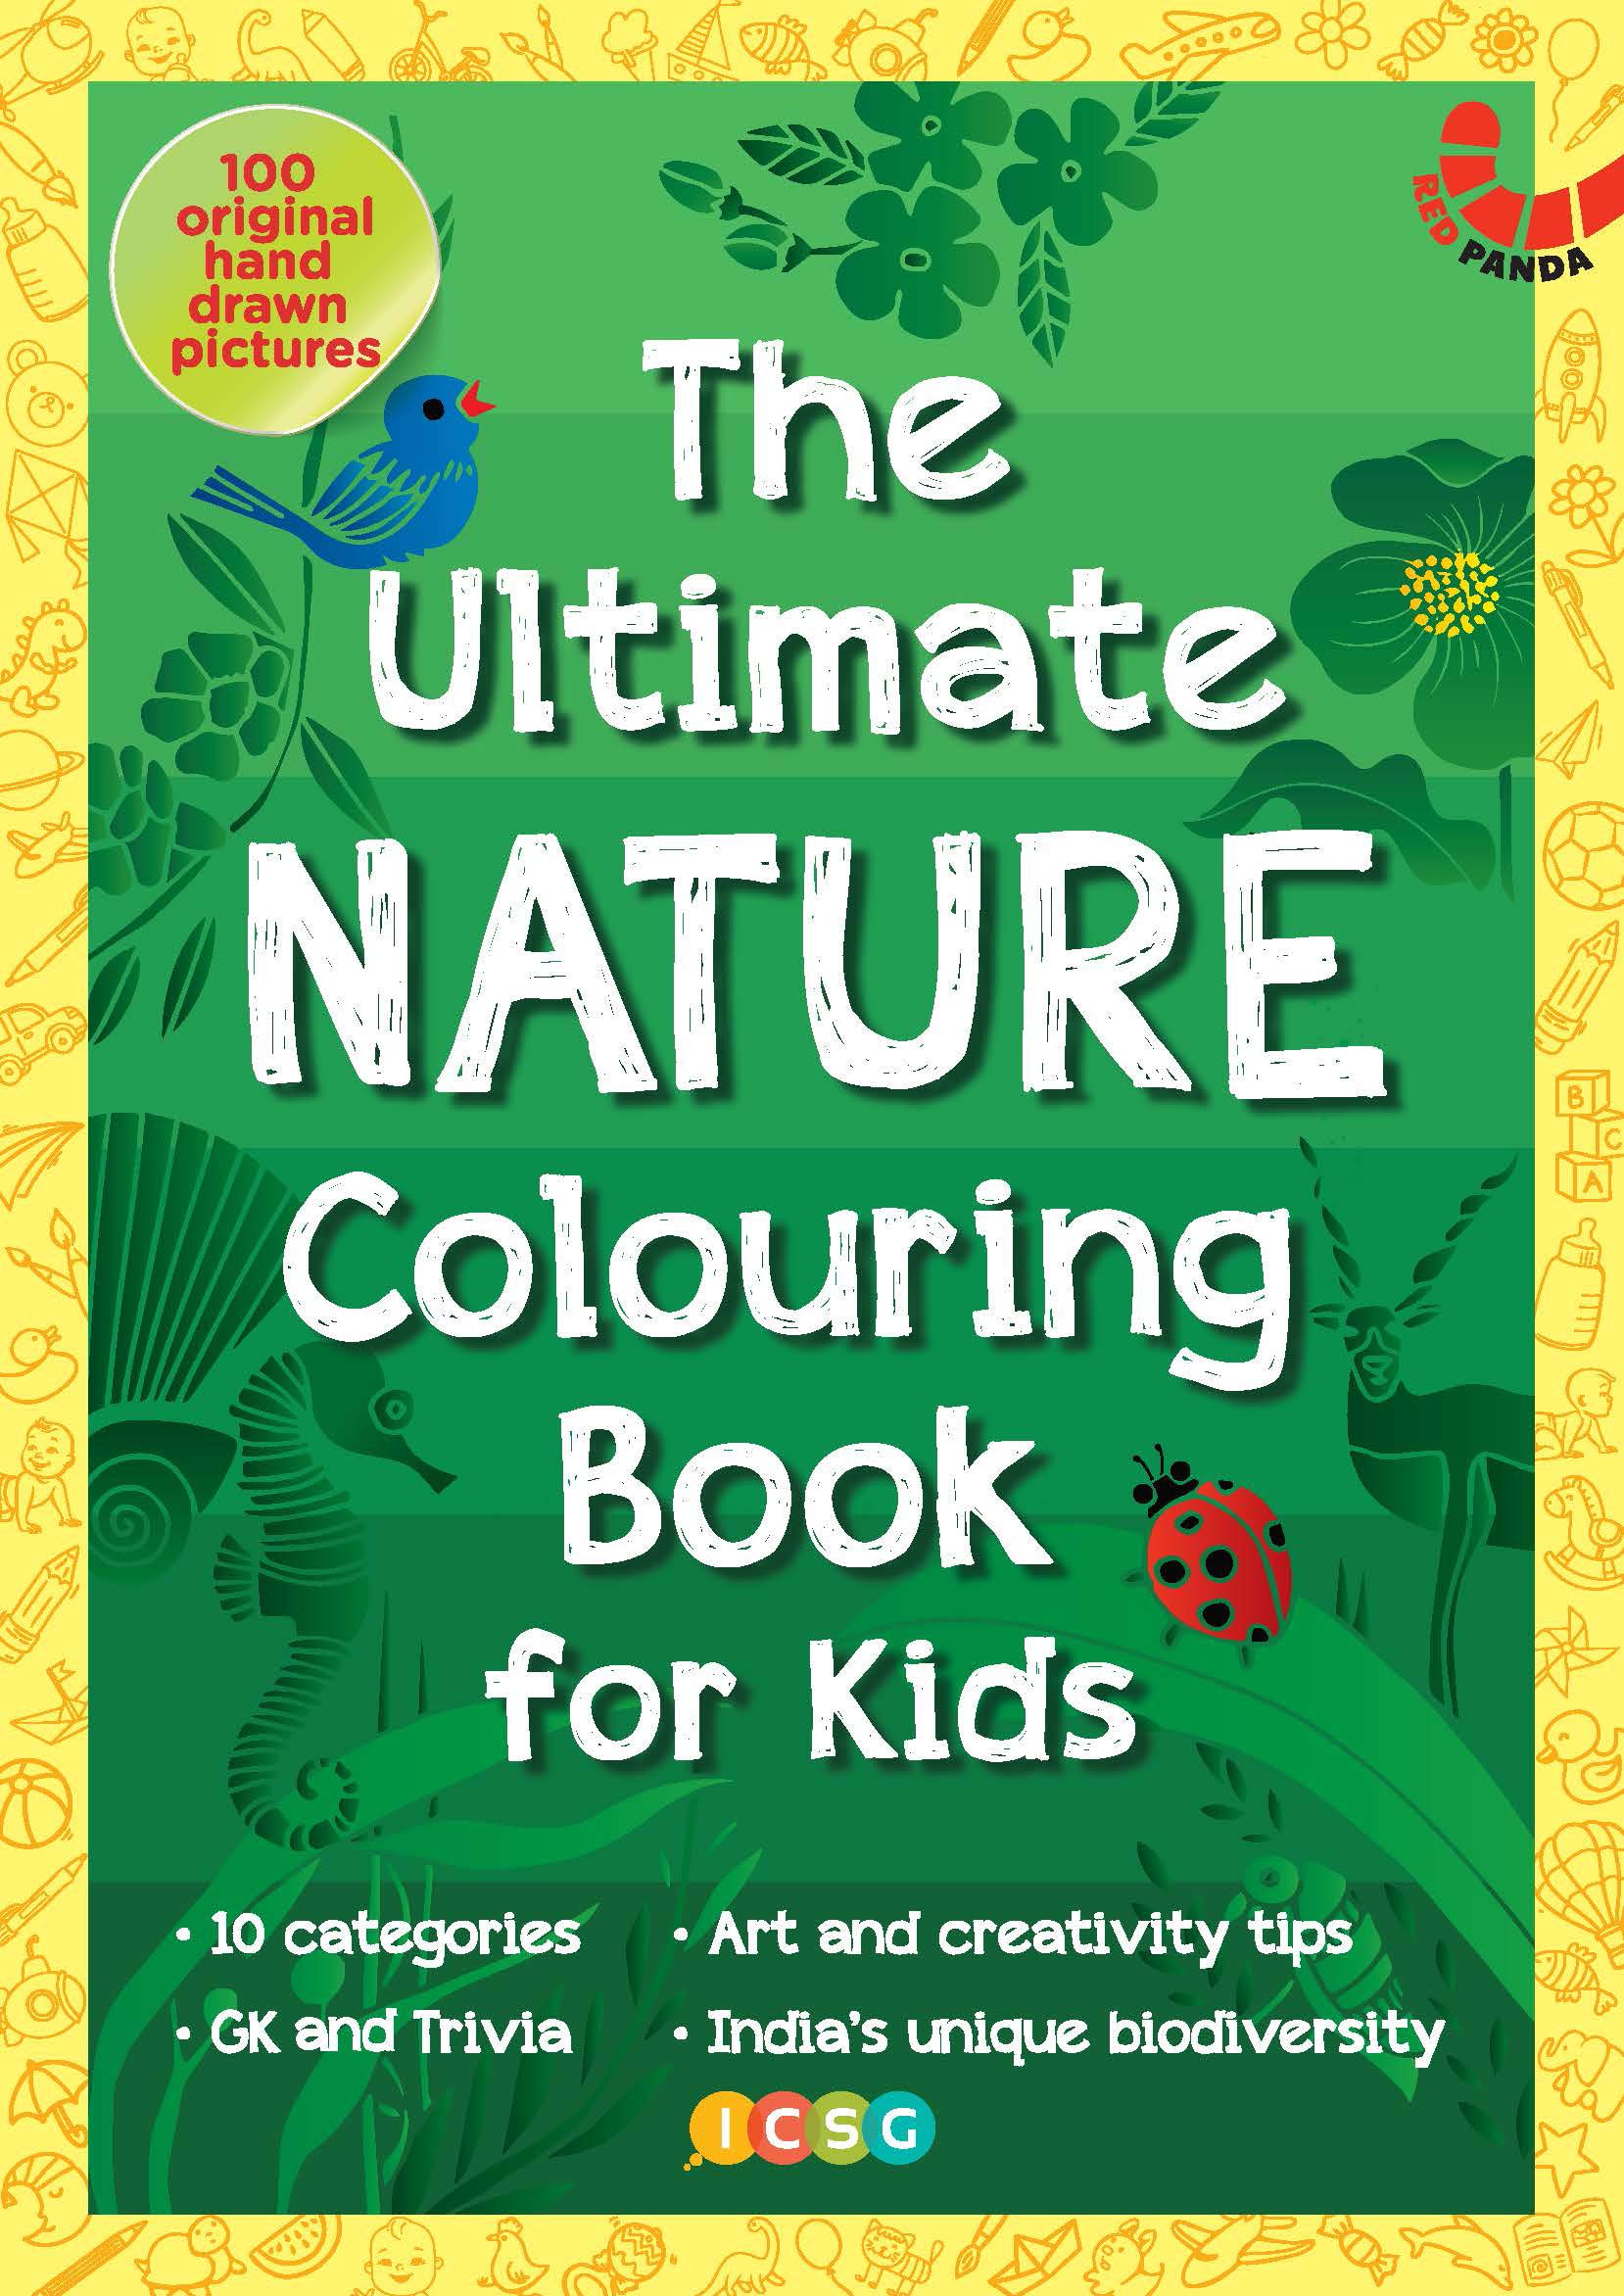 THE ULTIMATE NATURE COLOURING BOOK